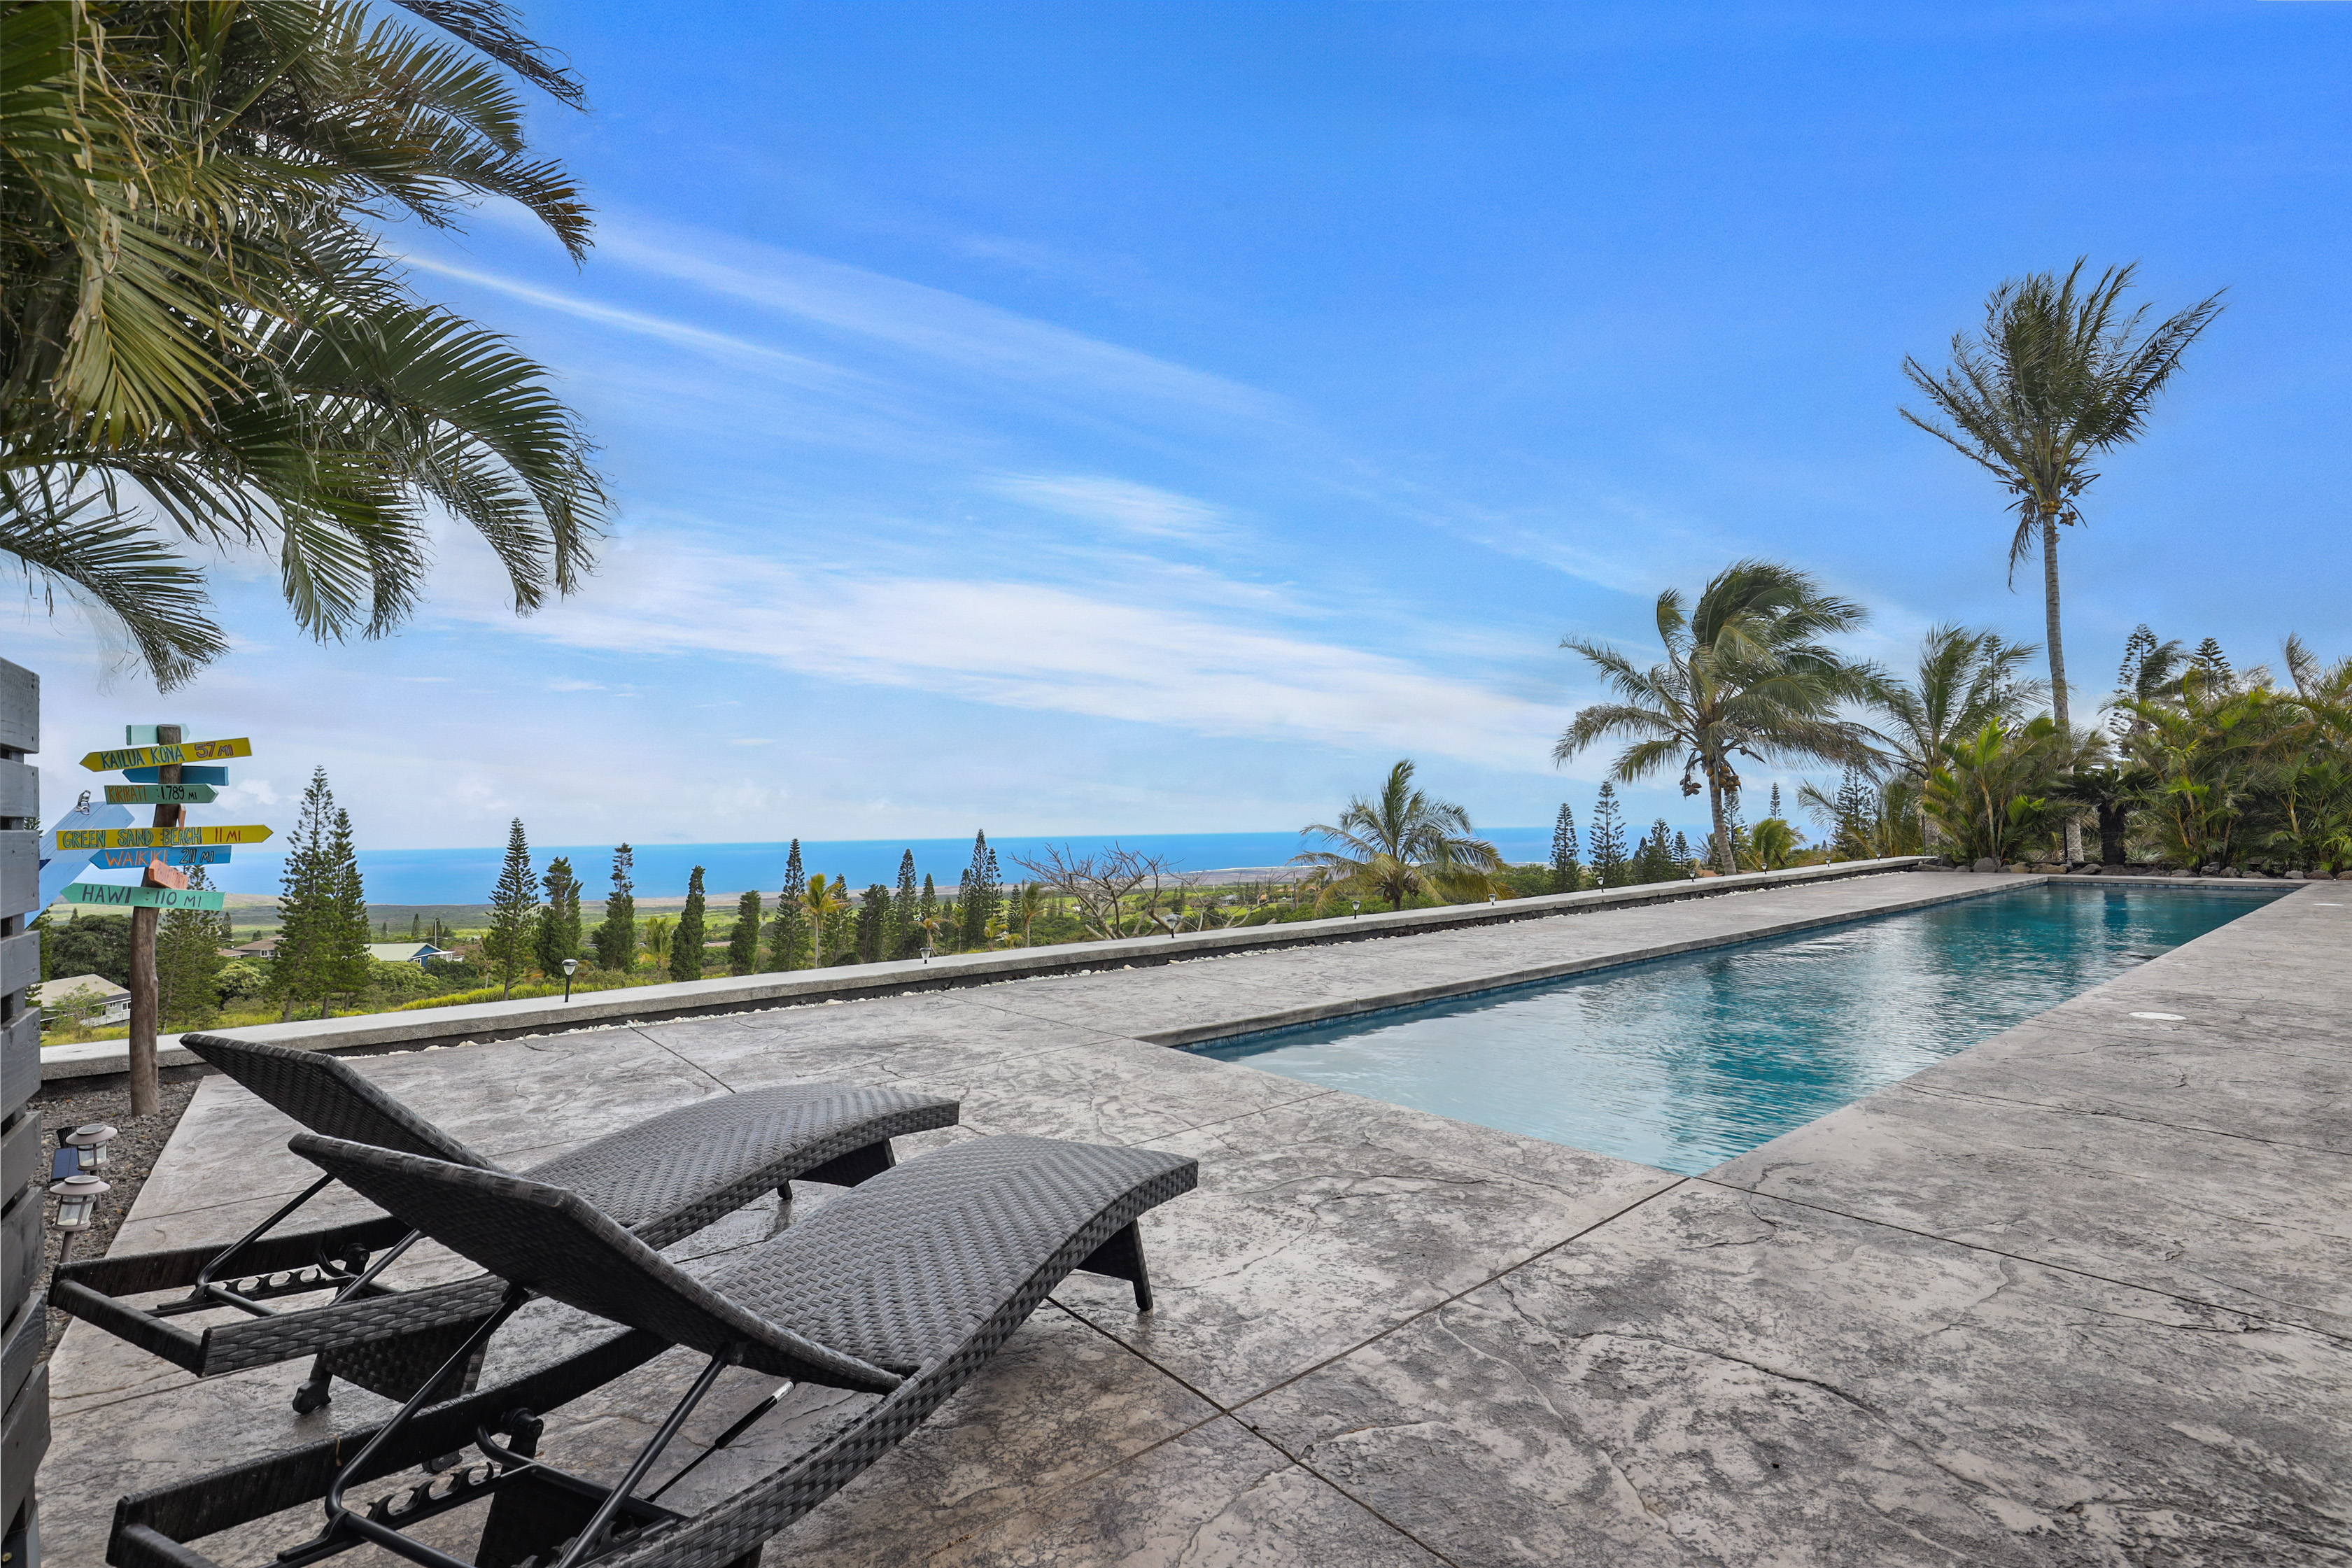 Sit back and enjoy the view from the pool deck.